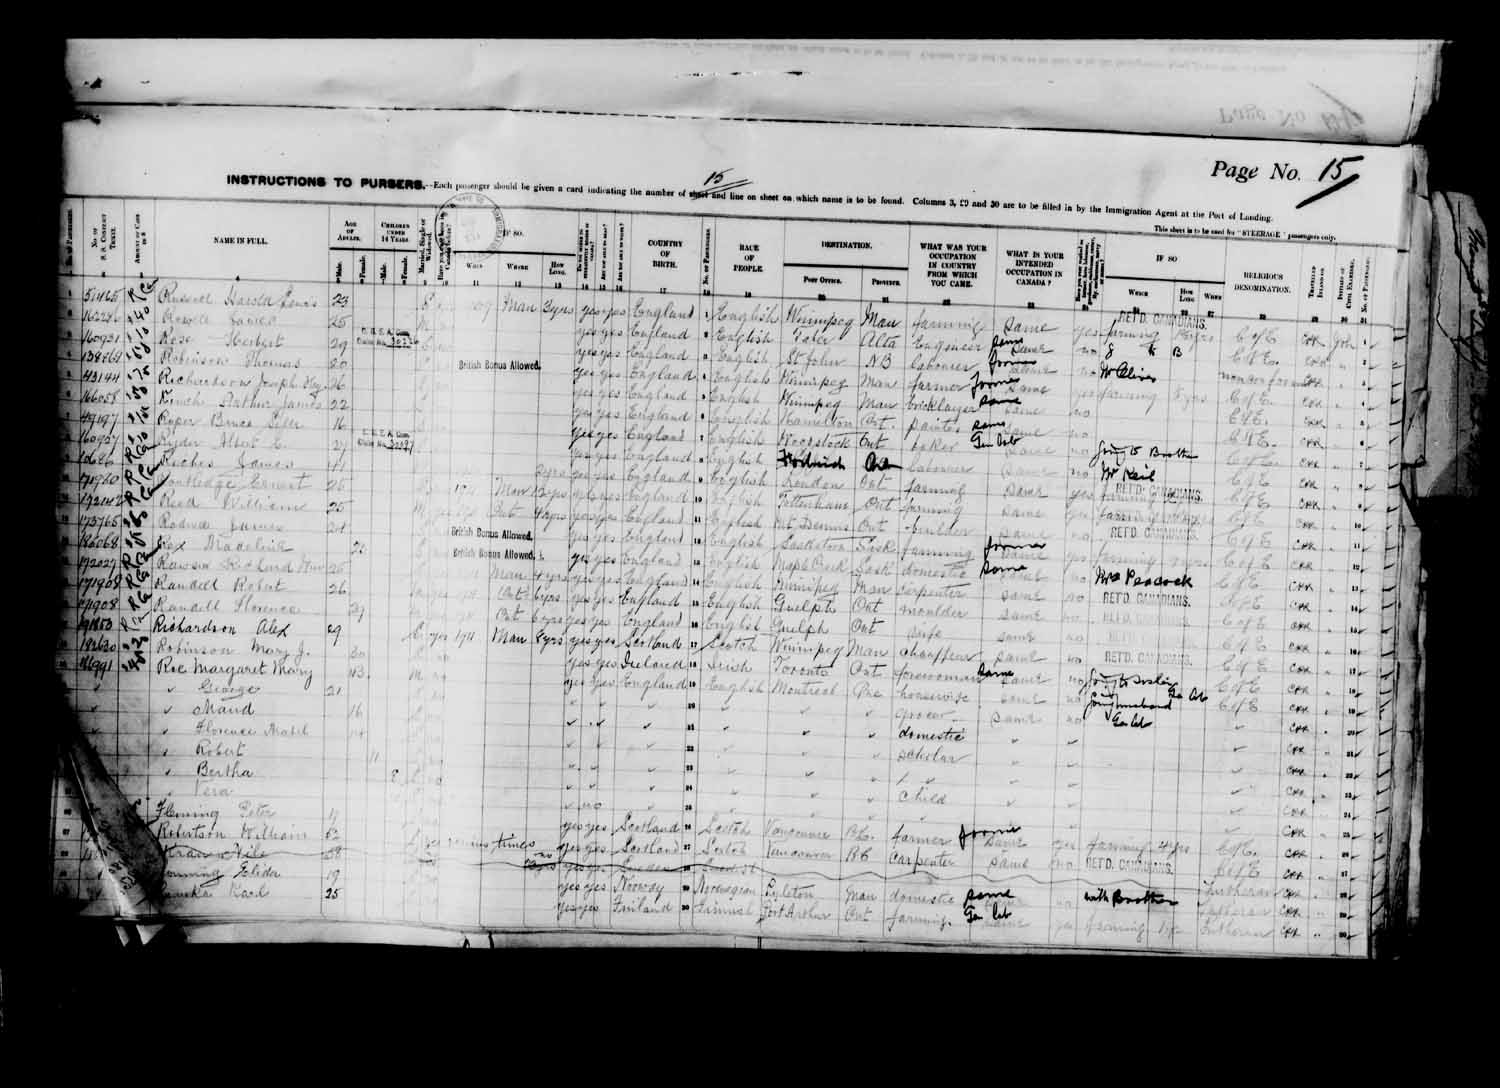 Digitized page of Passenger Lists for Image No.: e003627204